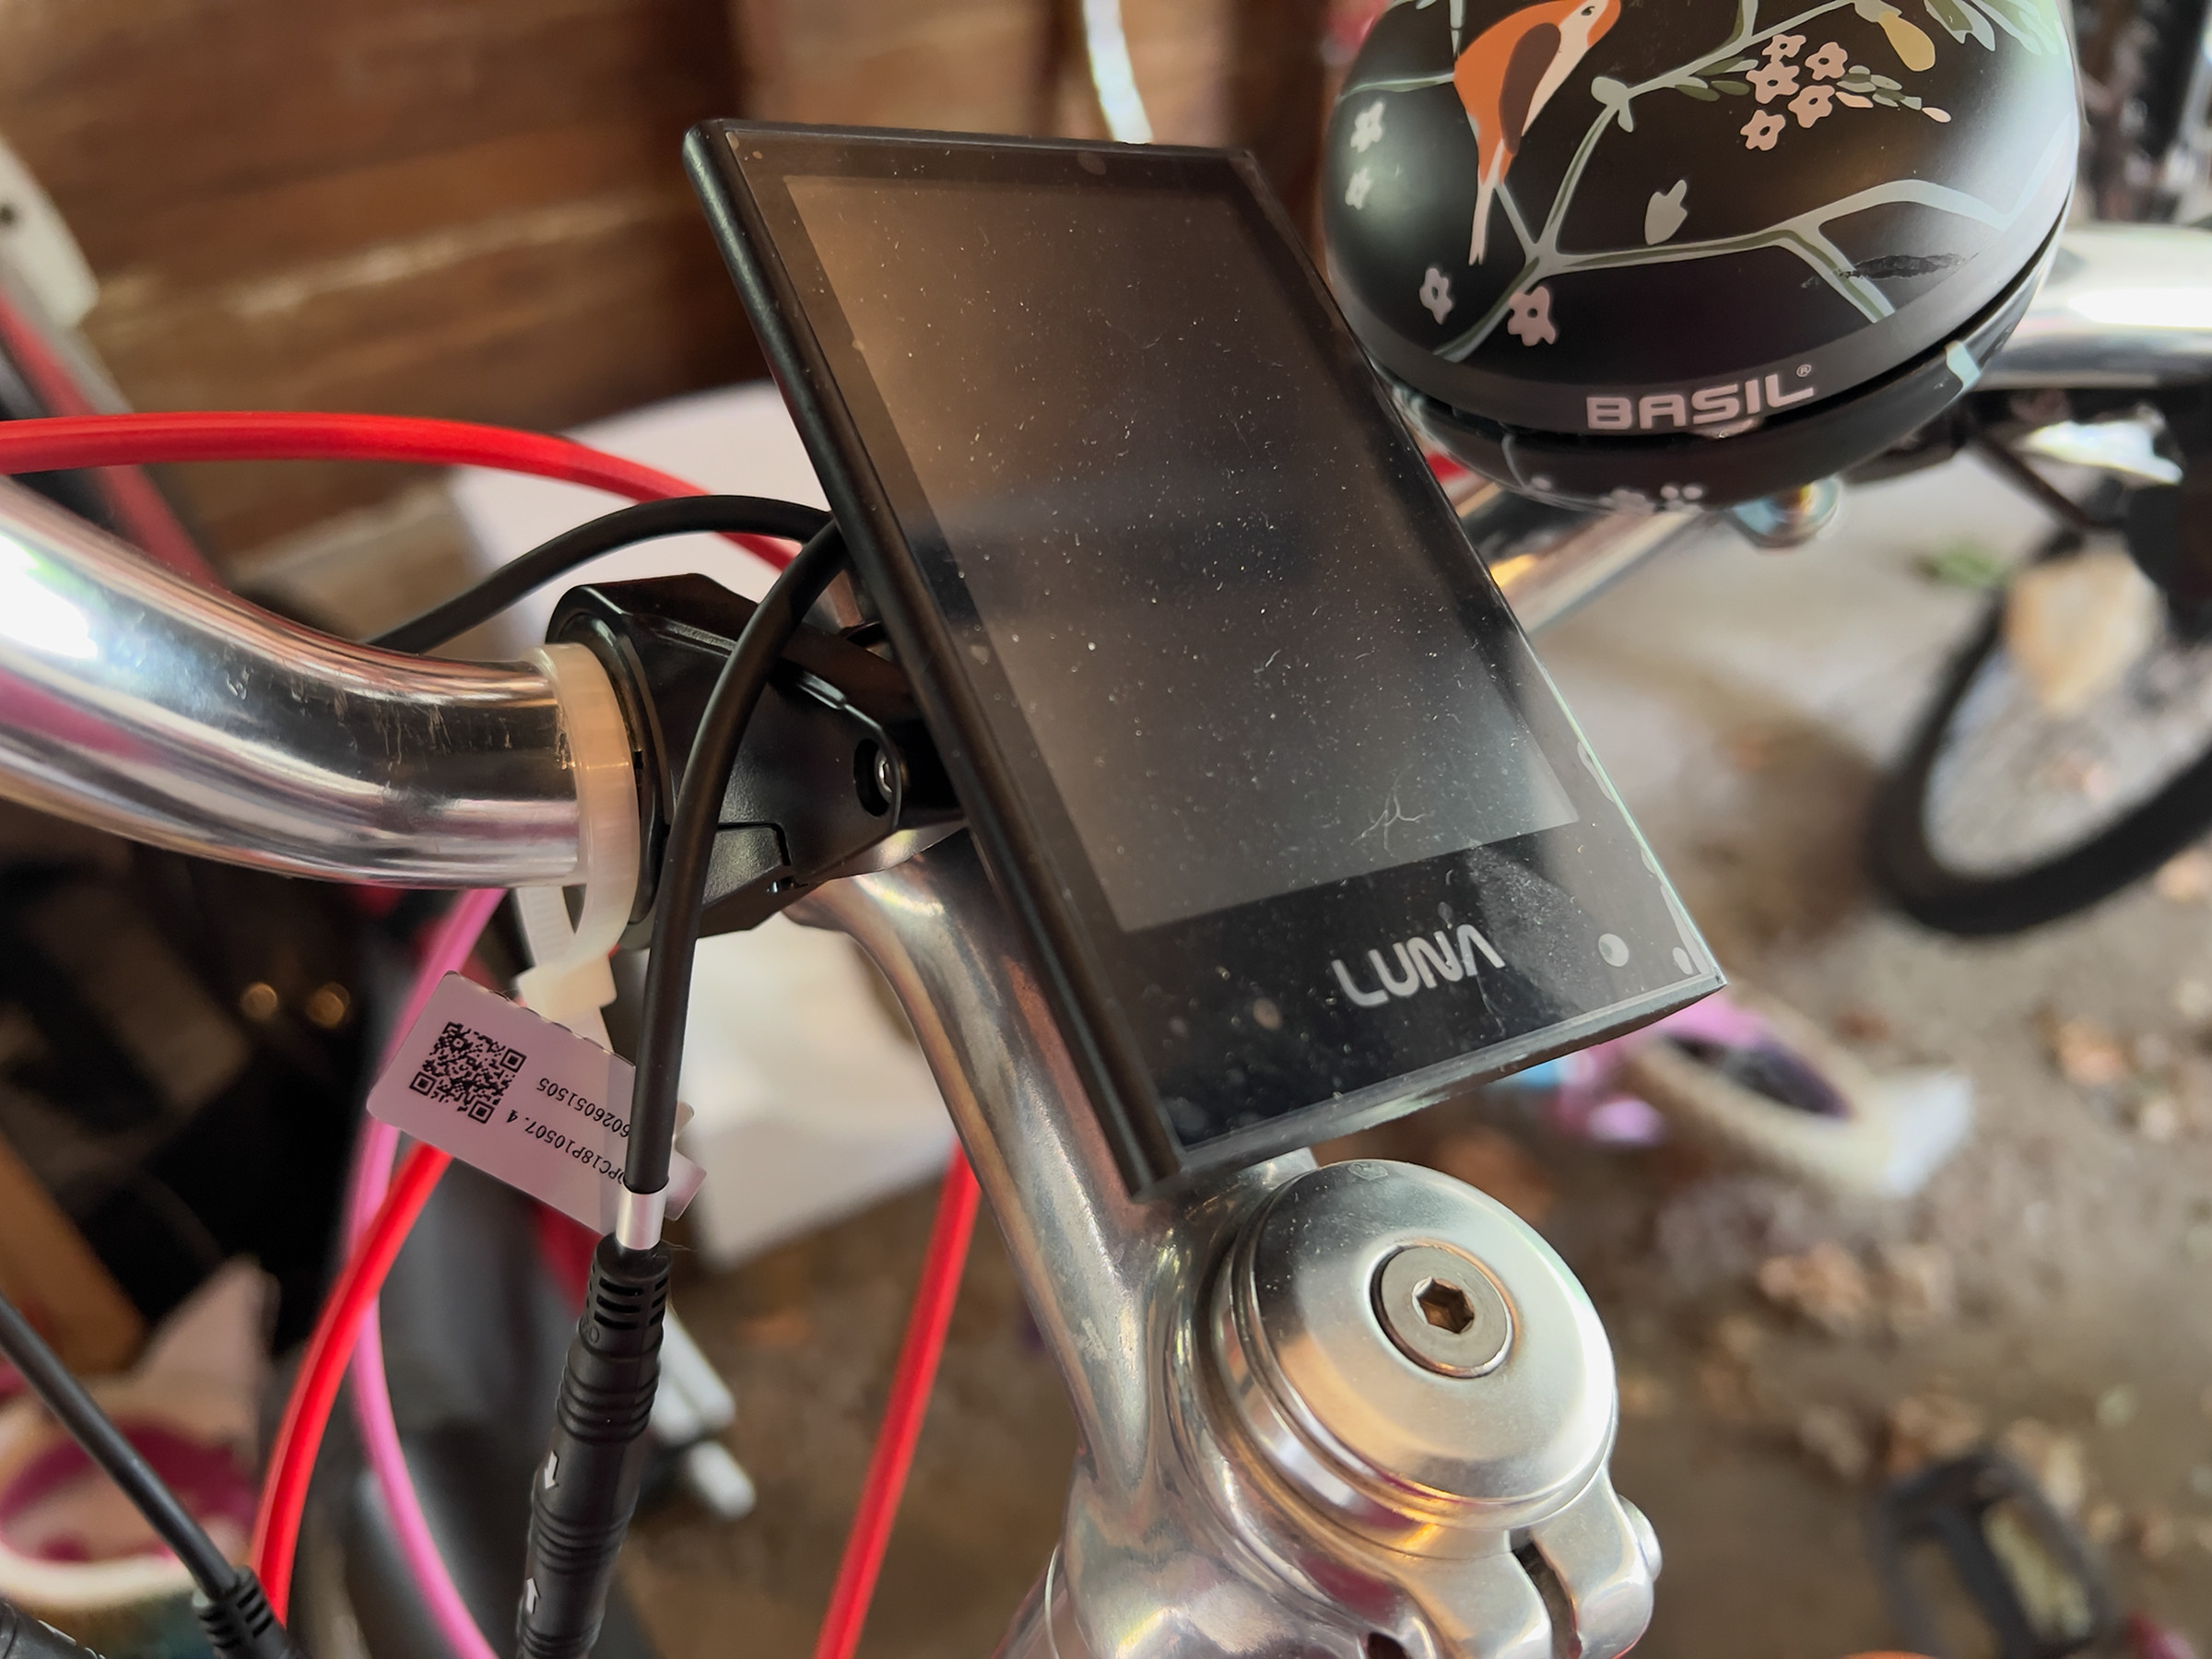 A picture of the Luna display attached to the handlebars.